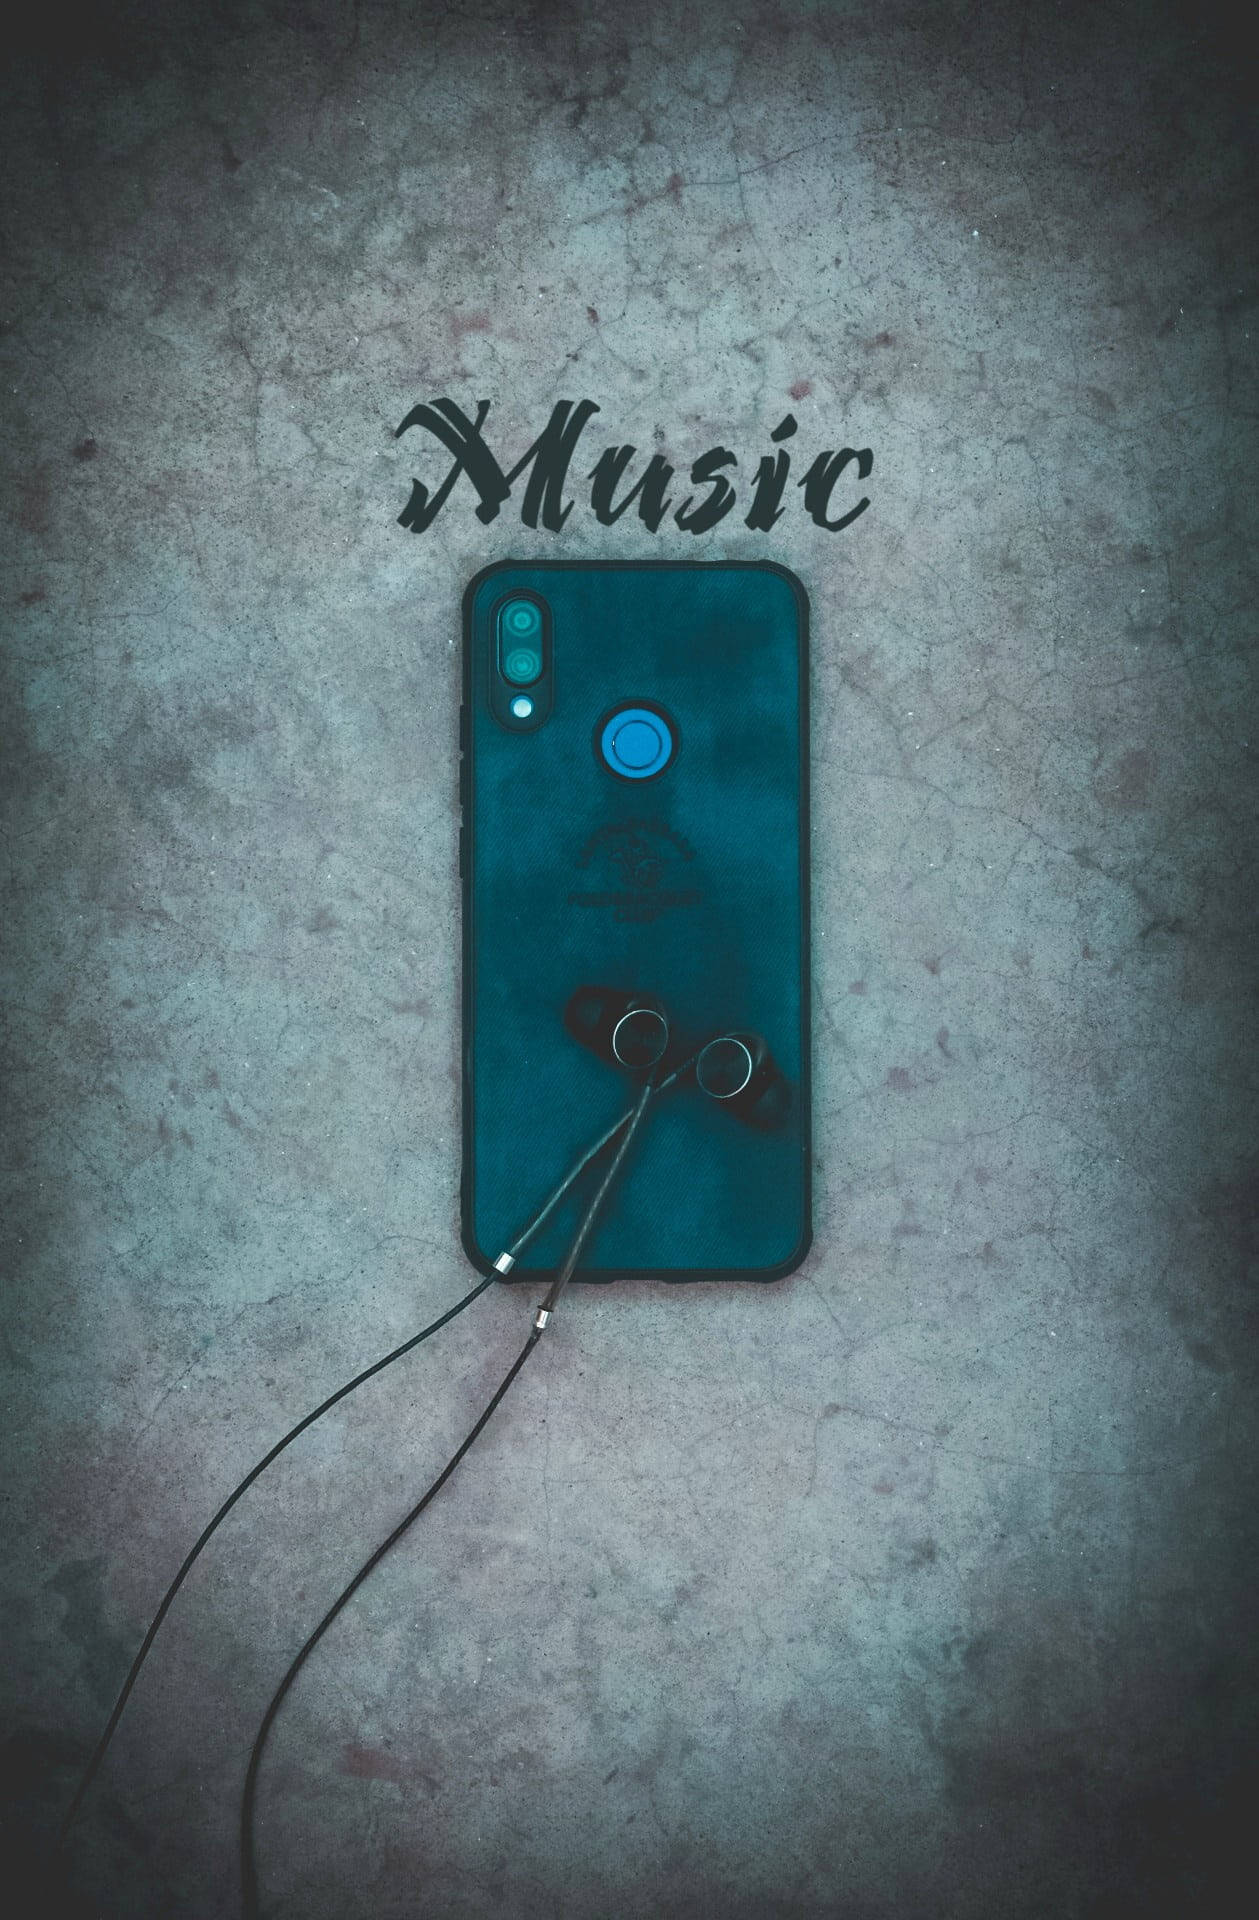 100+] Music Phone Background s for FREE 